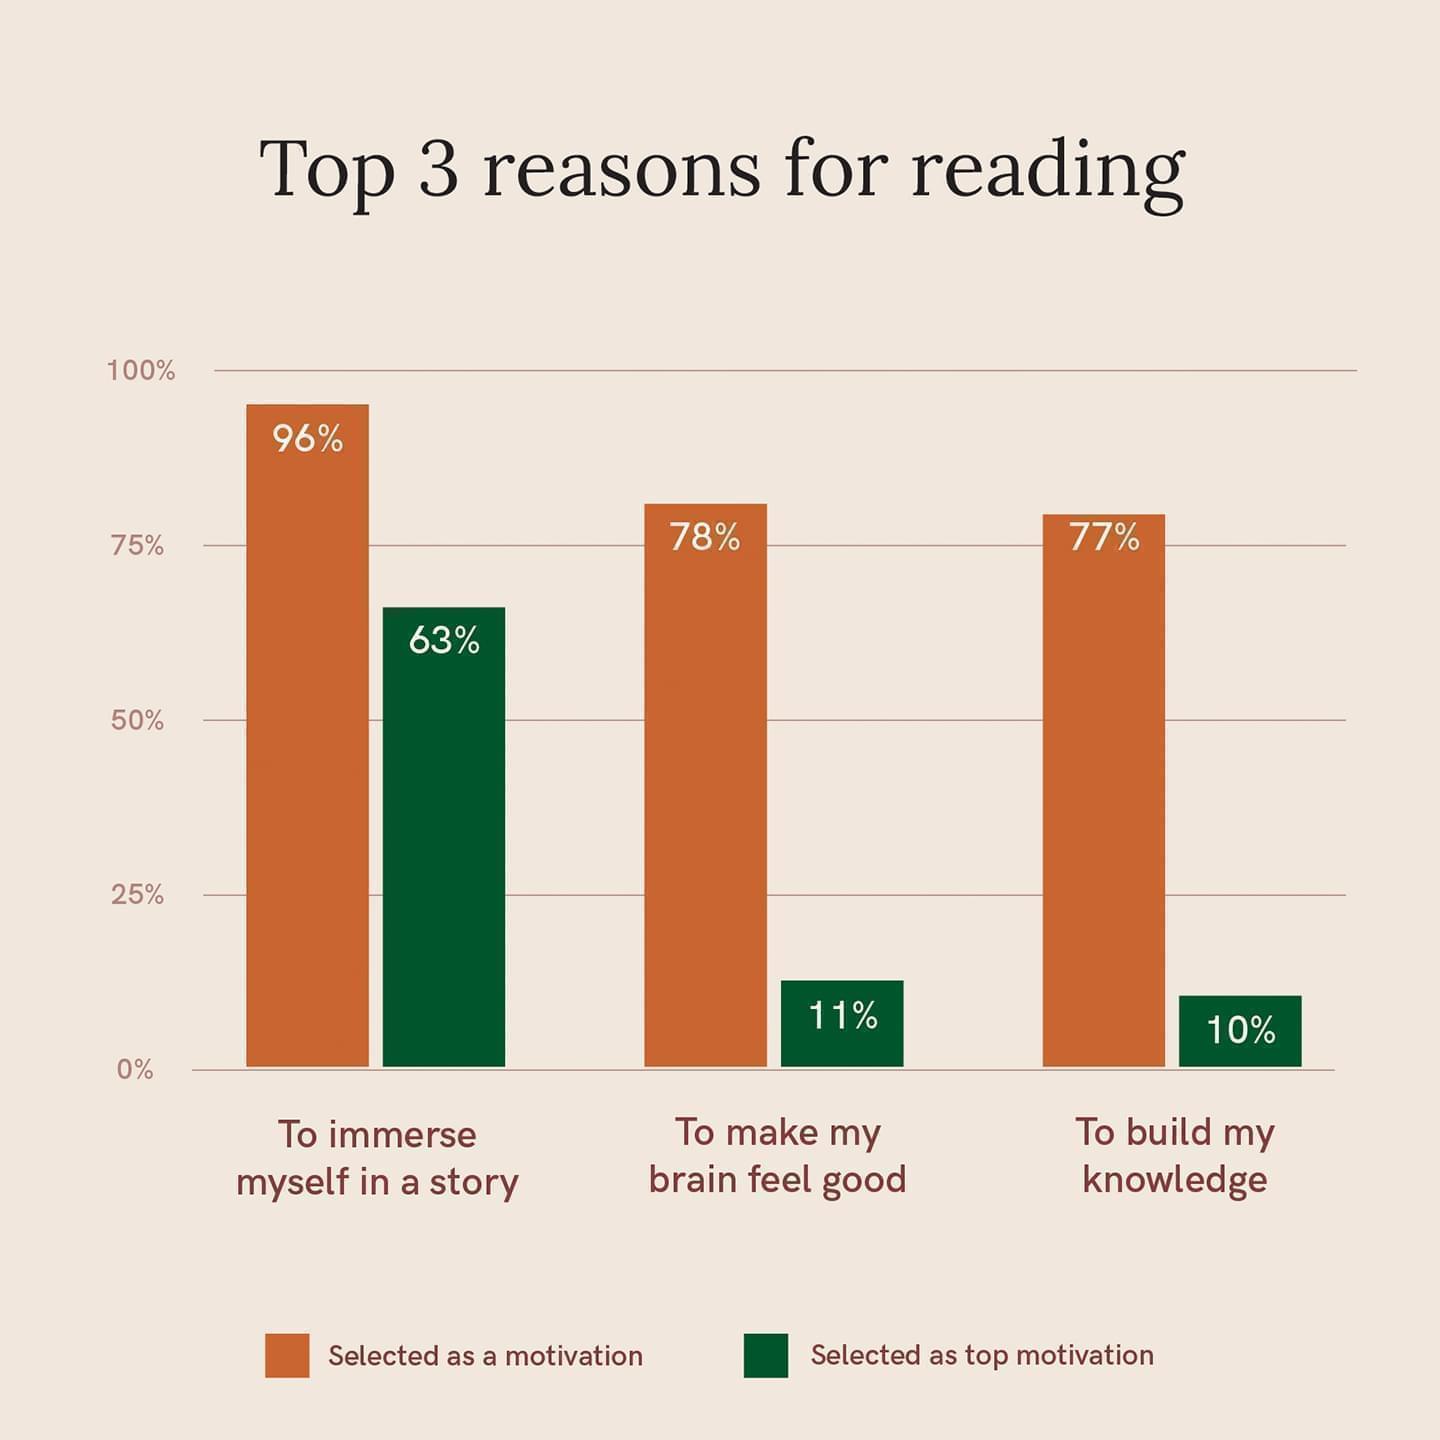 A bar chart taken from survey results showing the top 3 reasons for why people read books